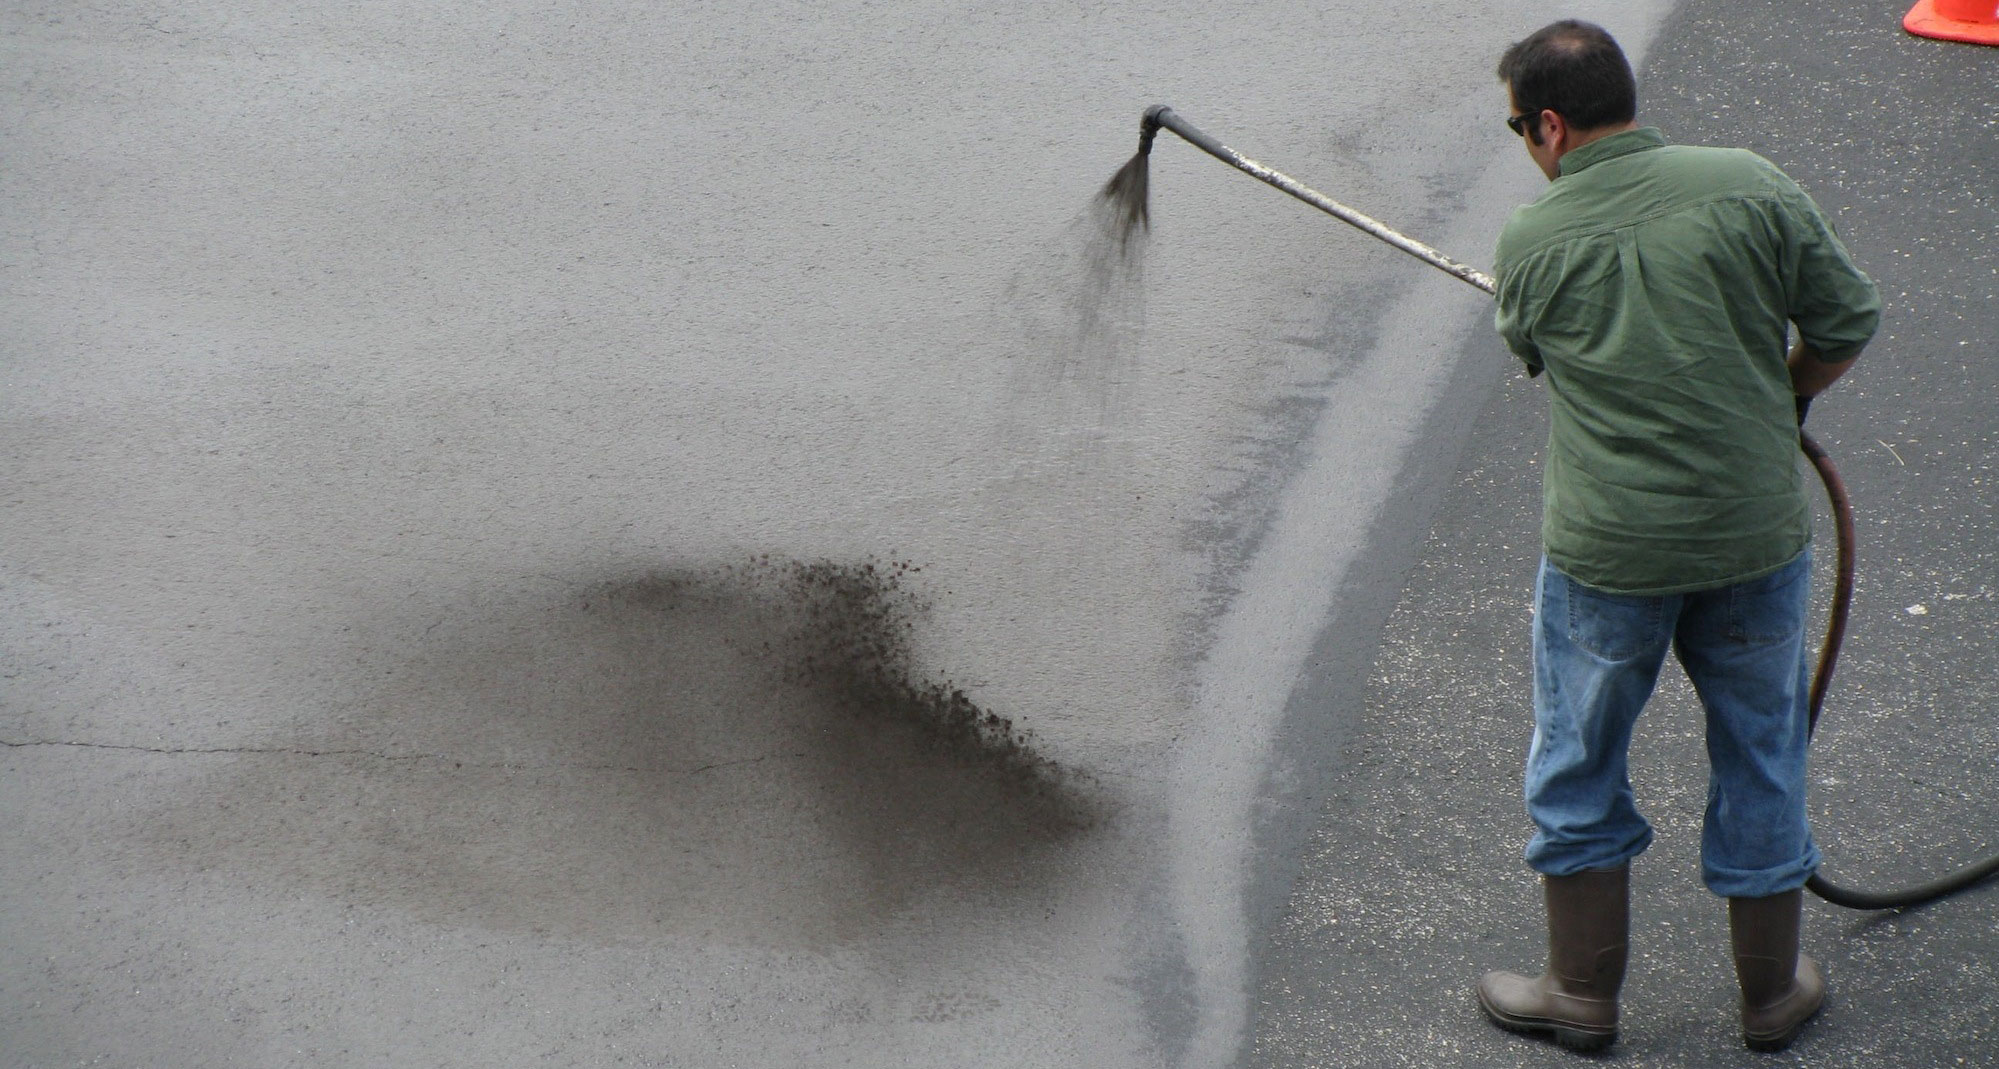 Study sees parking lots dust as cancer risk